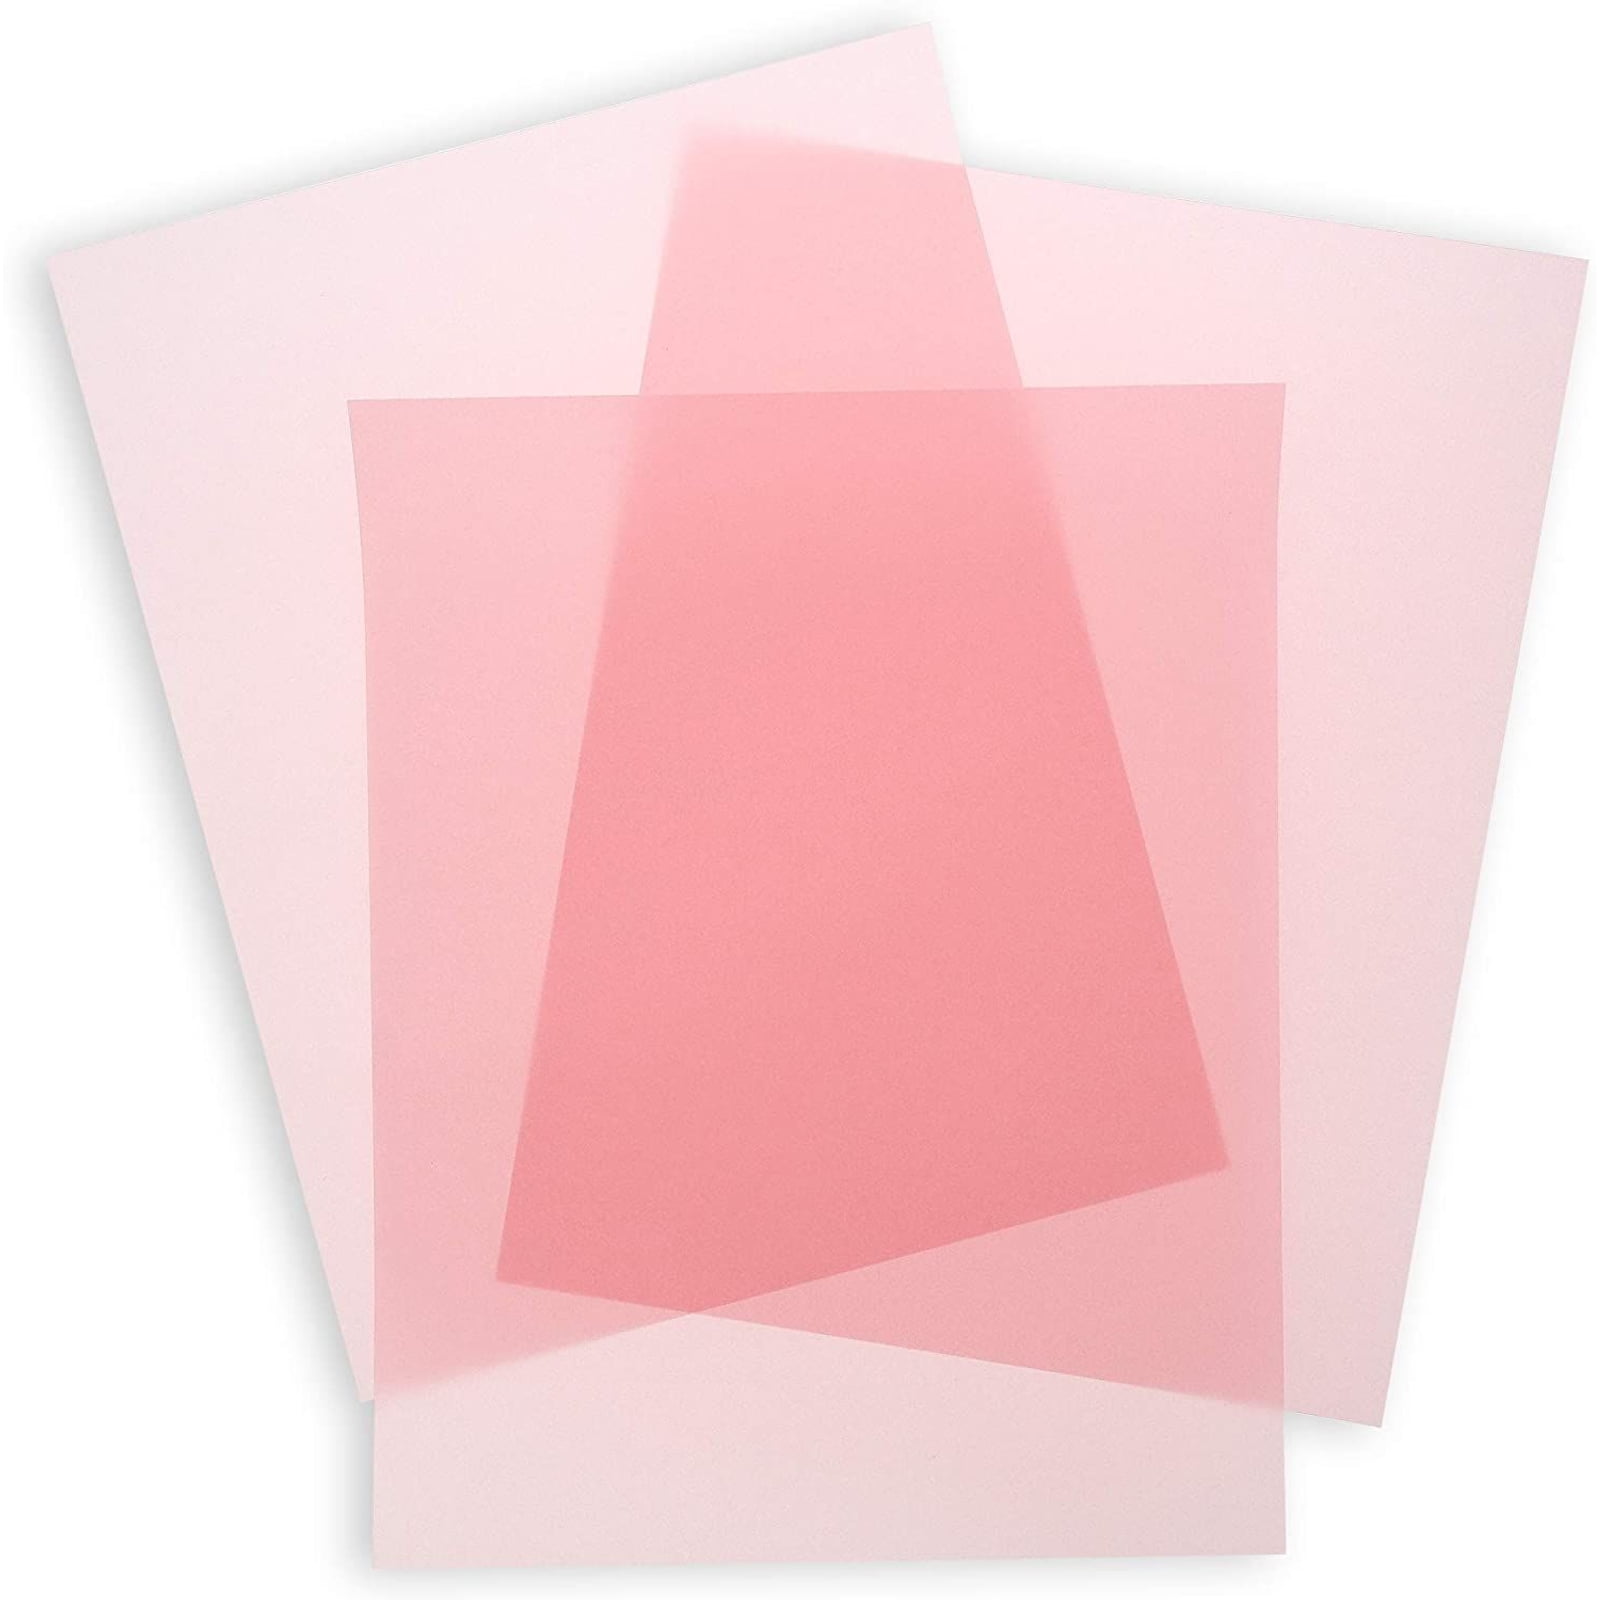 Printable Translucent Vellum Paper, Dowsabel 8.5” x 11” Vellum Tracing Paper Heavy Duty for Arts and Crafts, Pencil, Marker and Ink - Trace Images